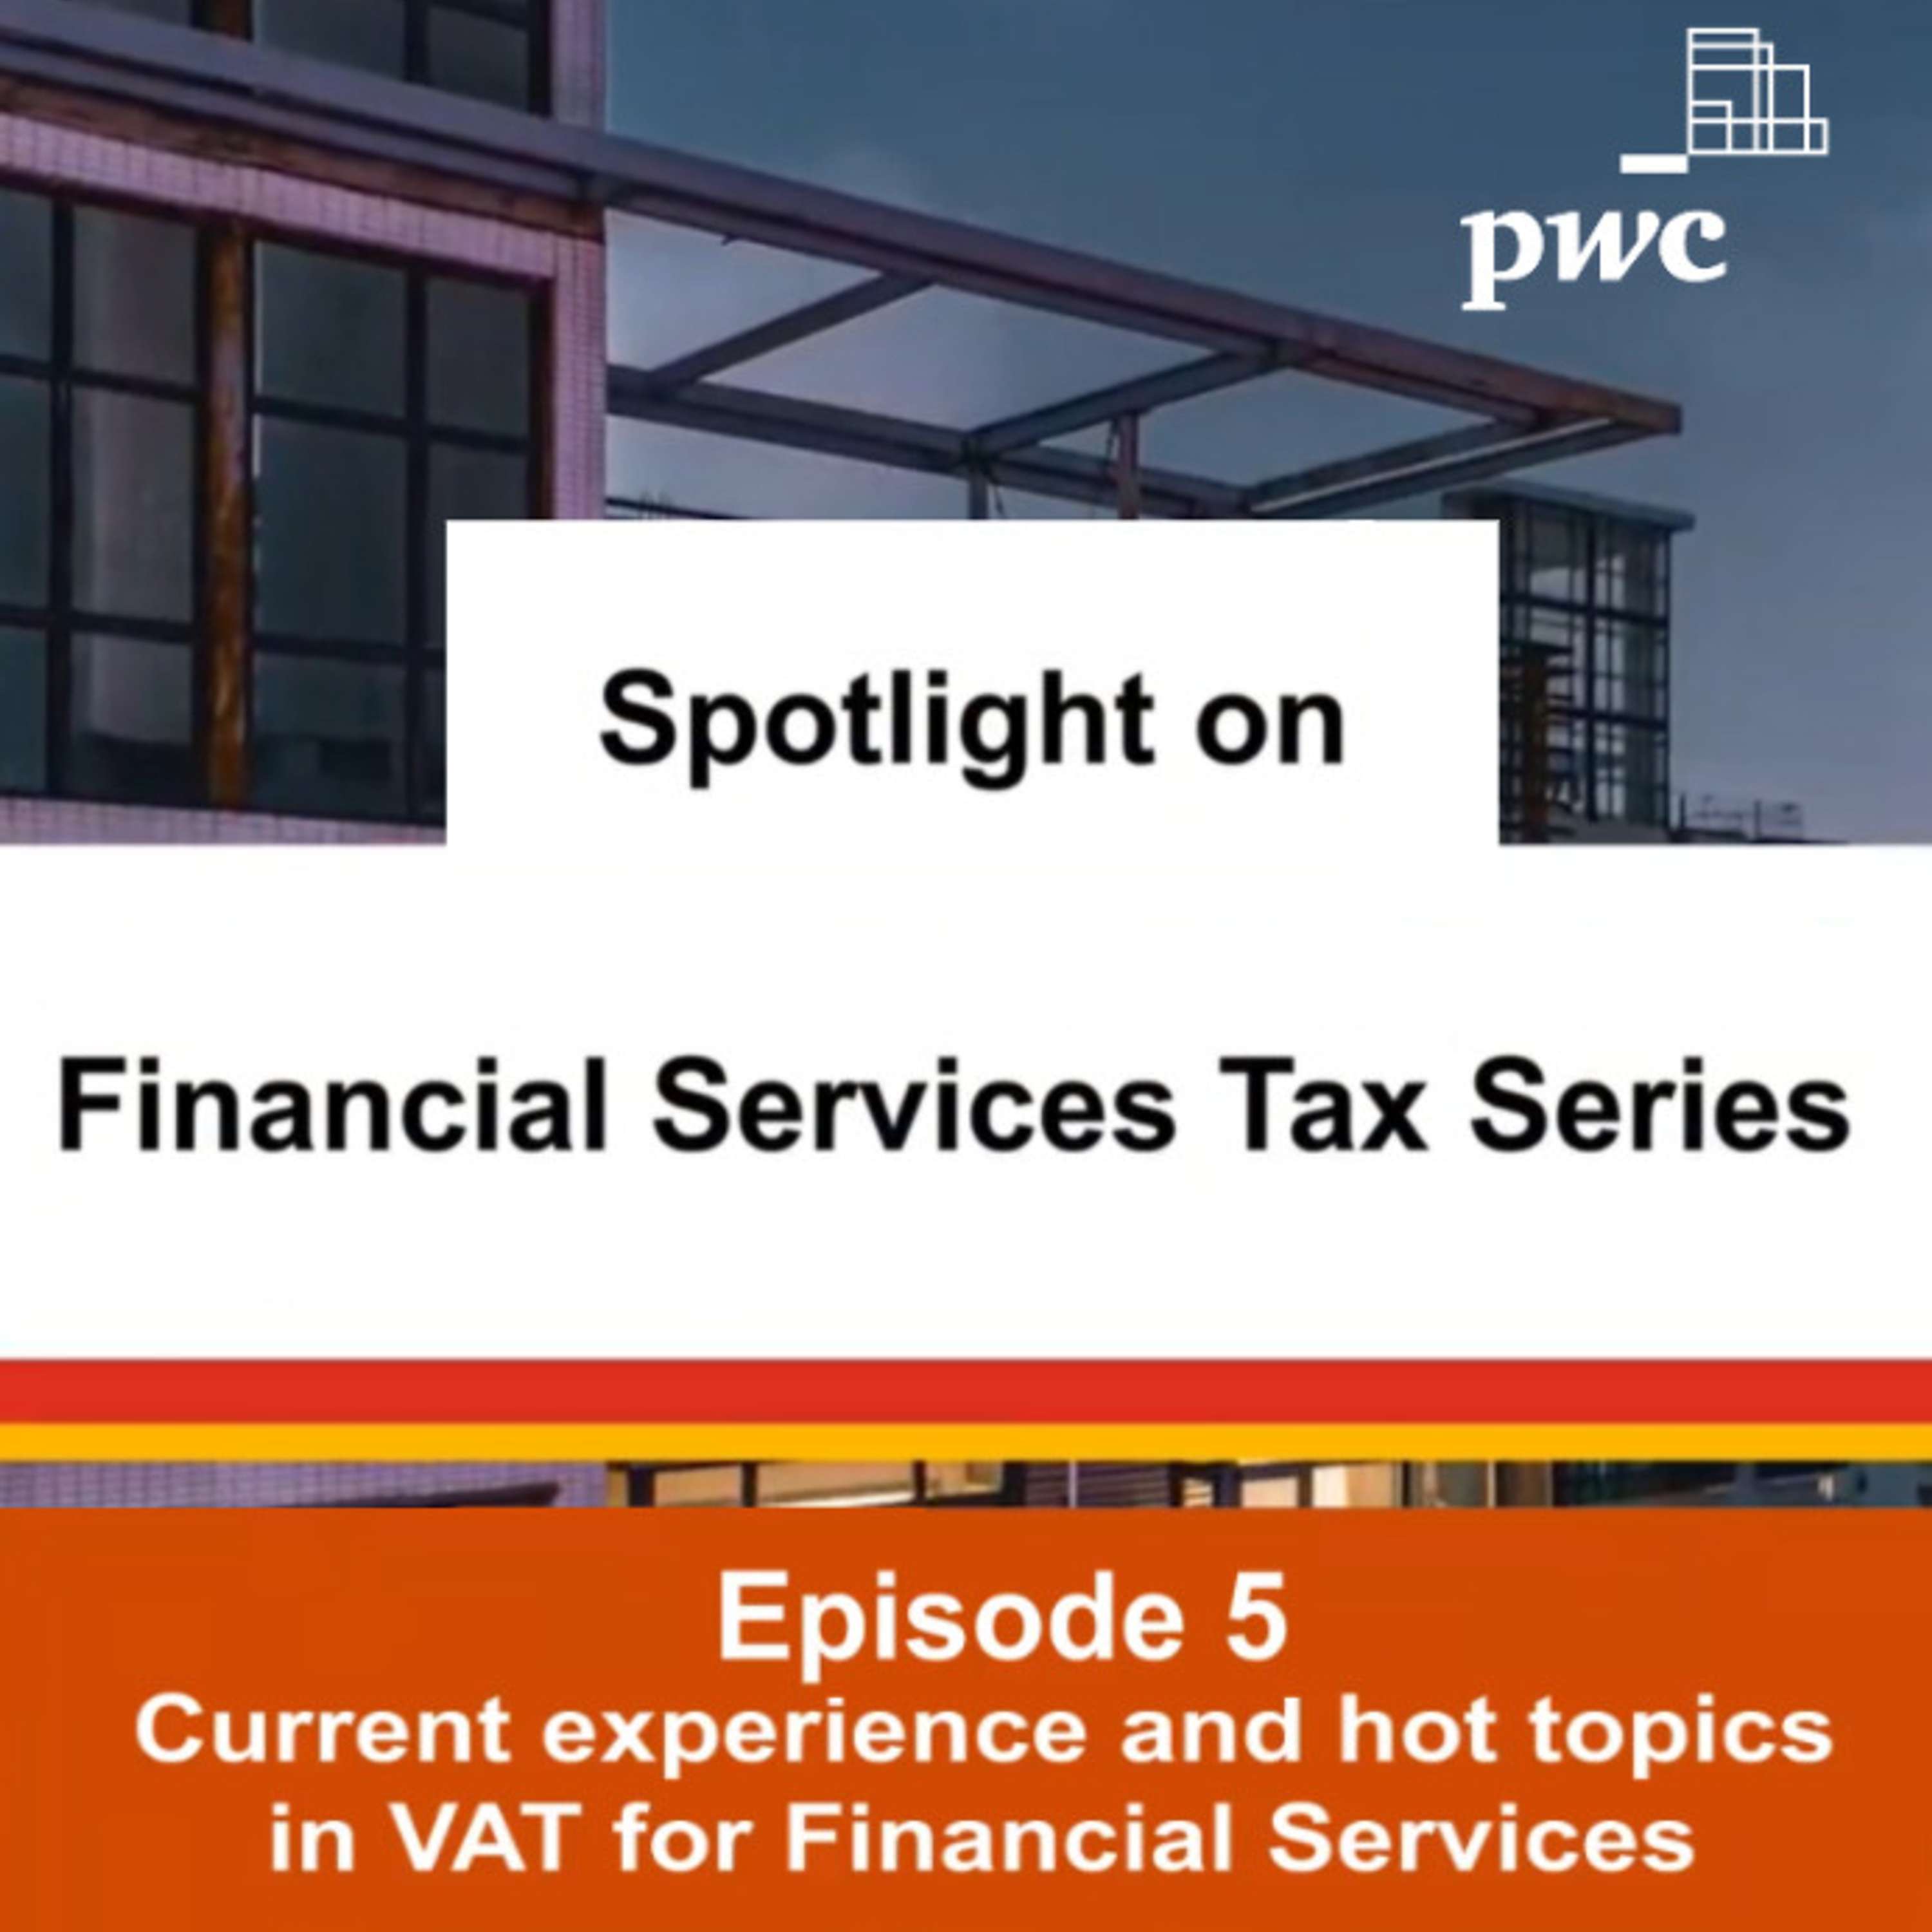 Series 1 - Episode 5: Current experience and hot topics in VAT for Financial Services